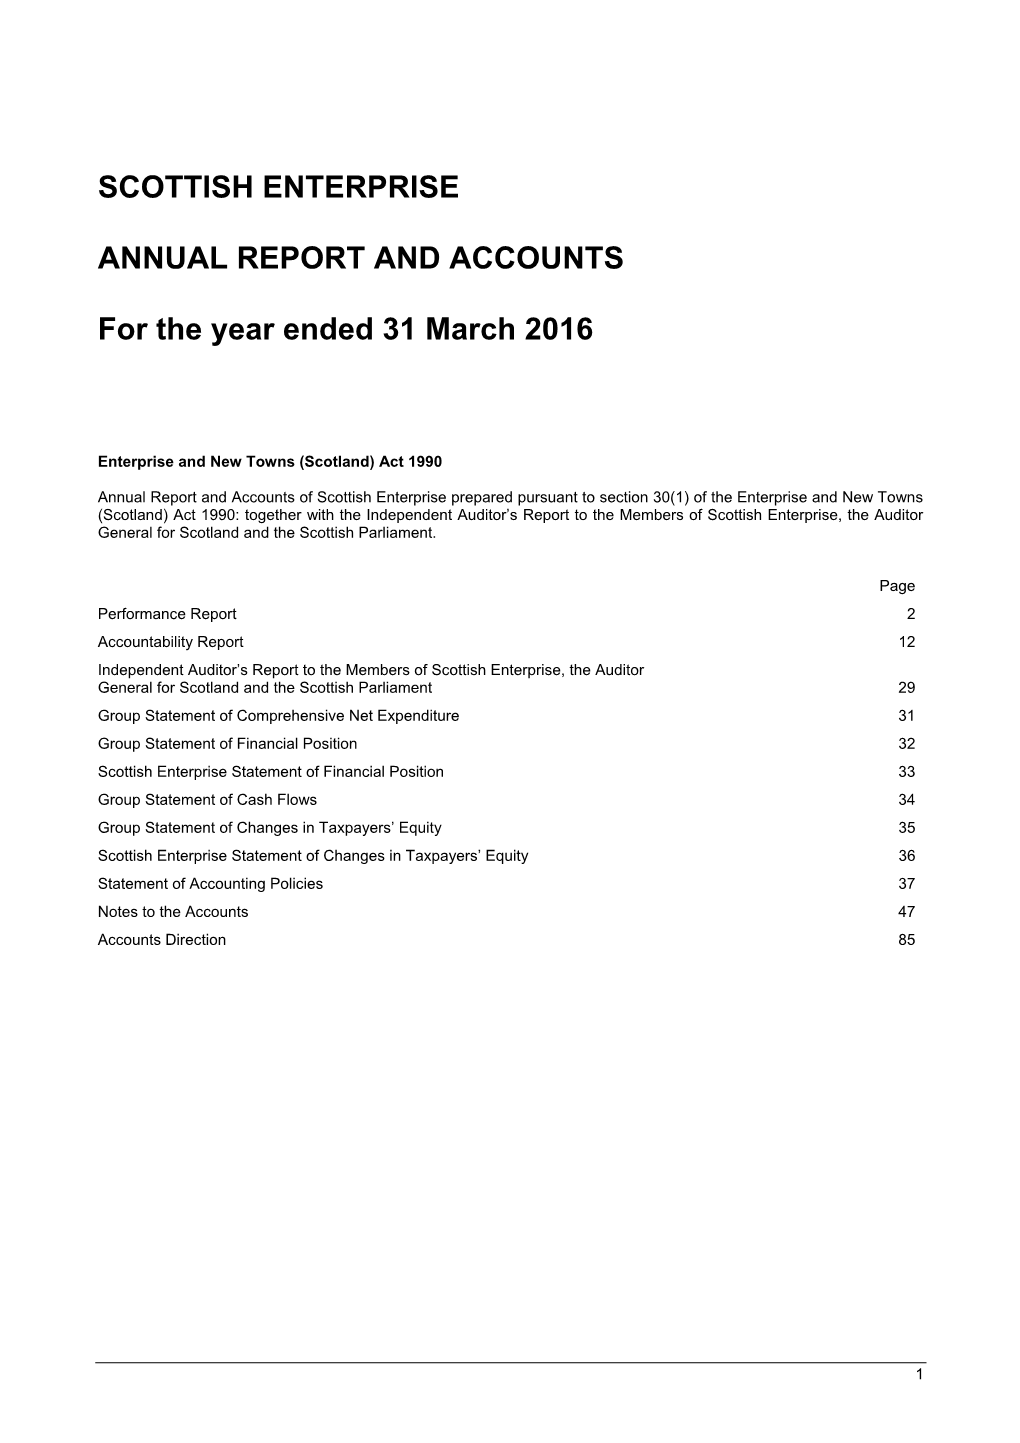 SCOTTISH ENTERPRISE ANNUAL REPORT and ACCOUNTS for The